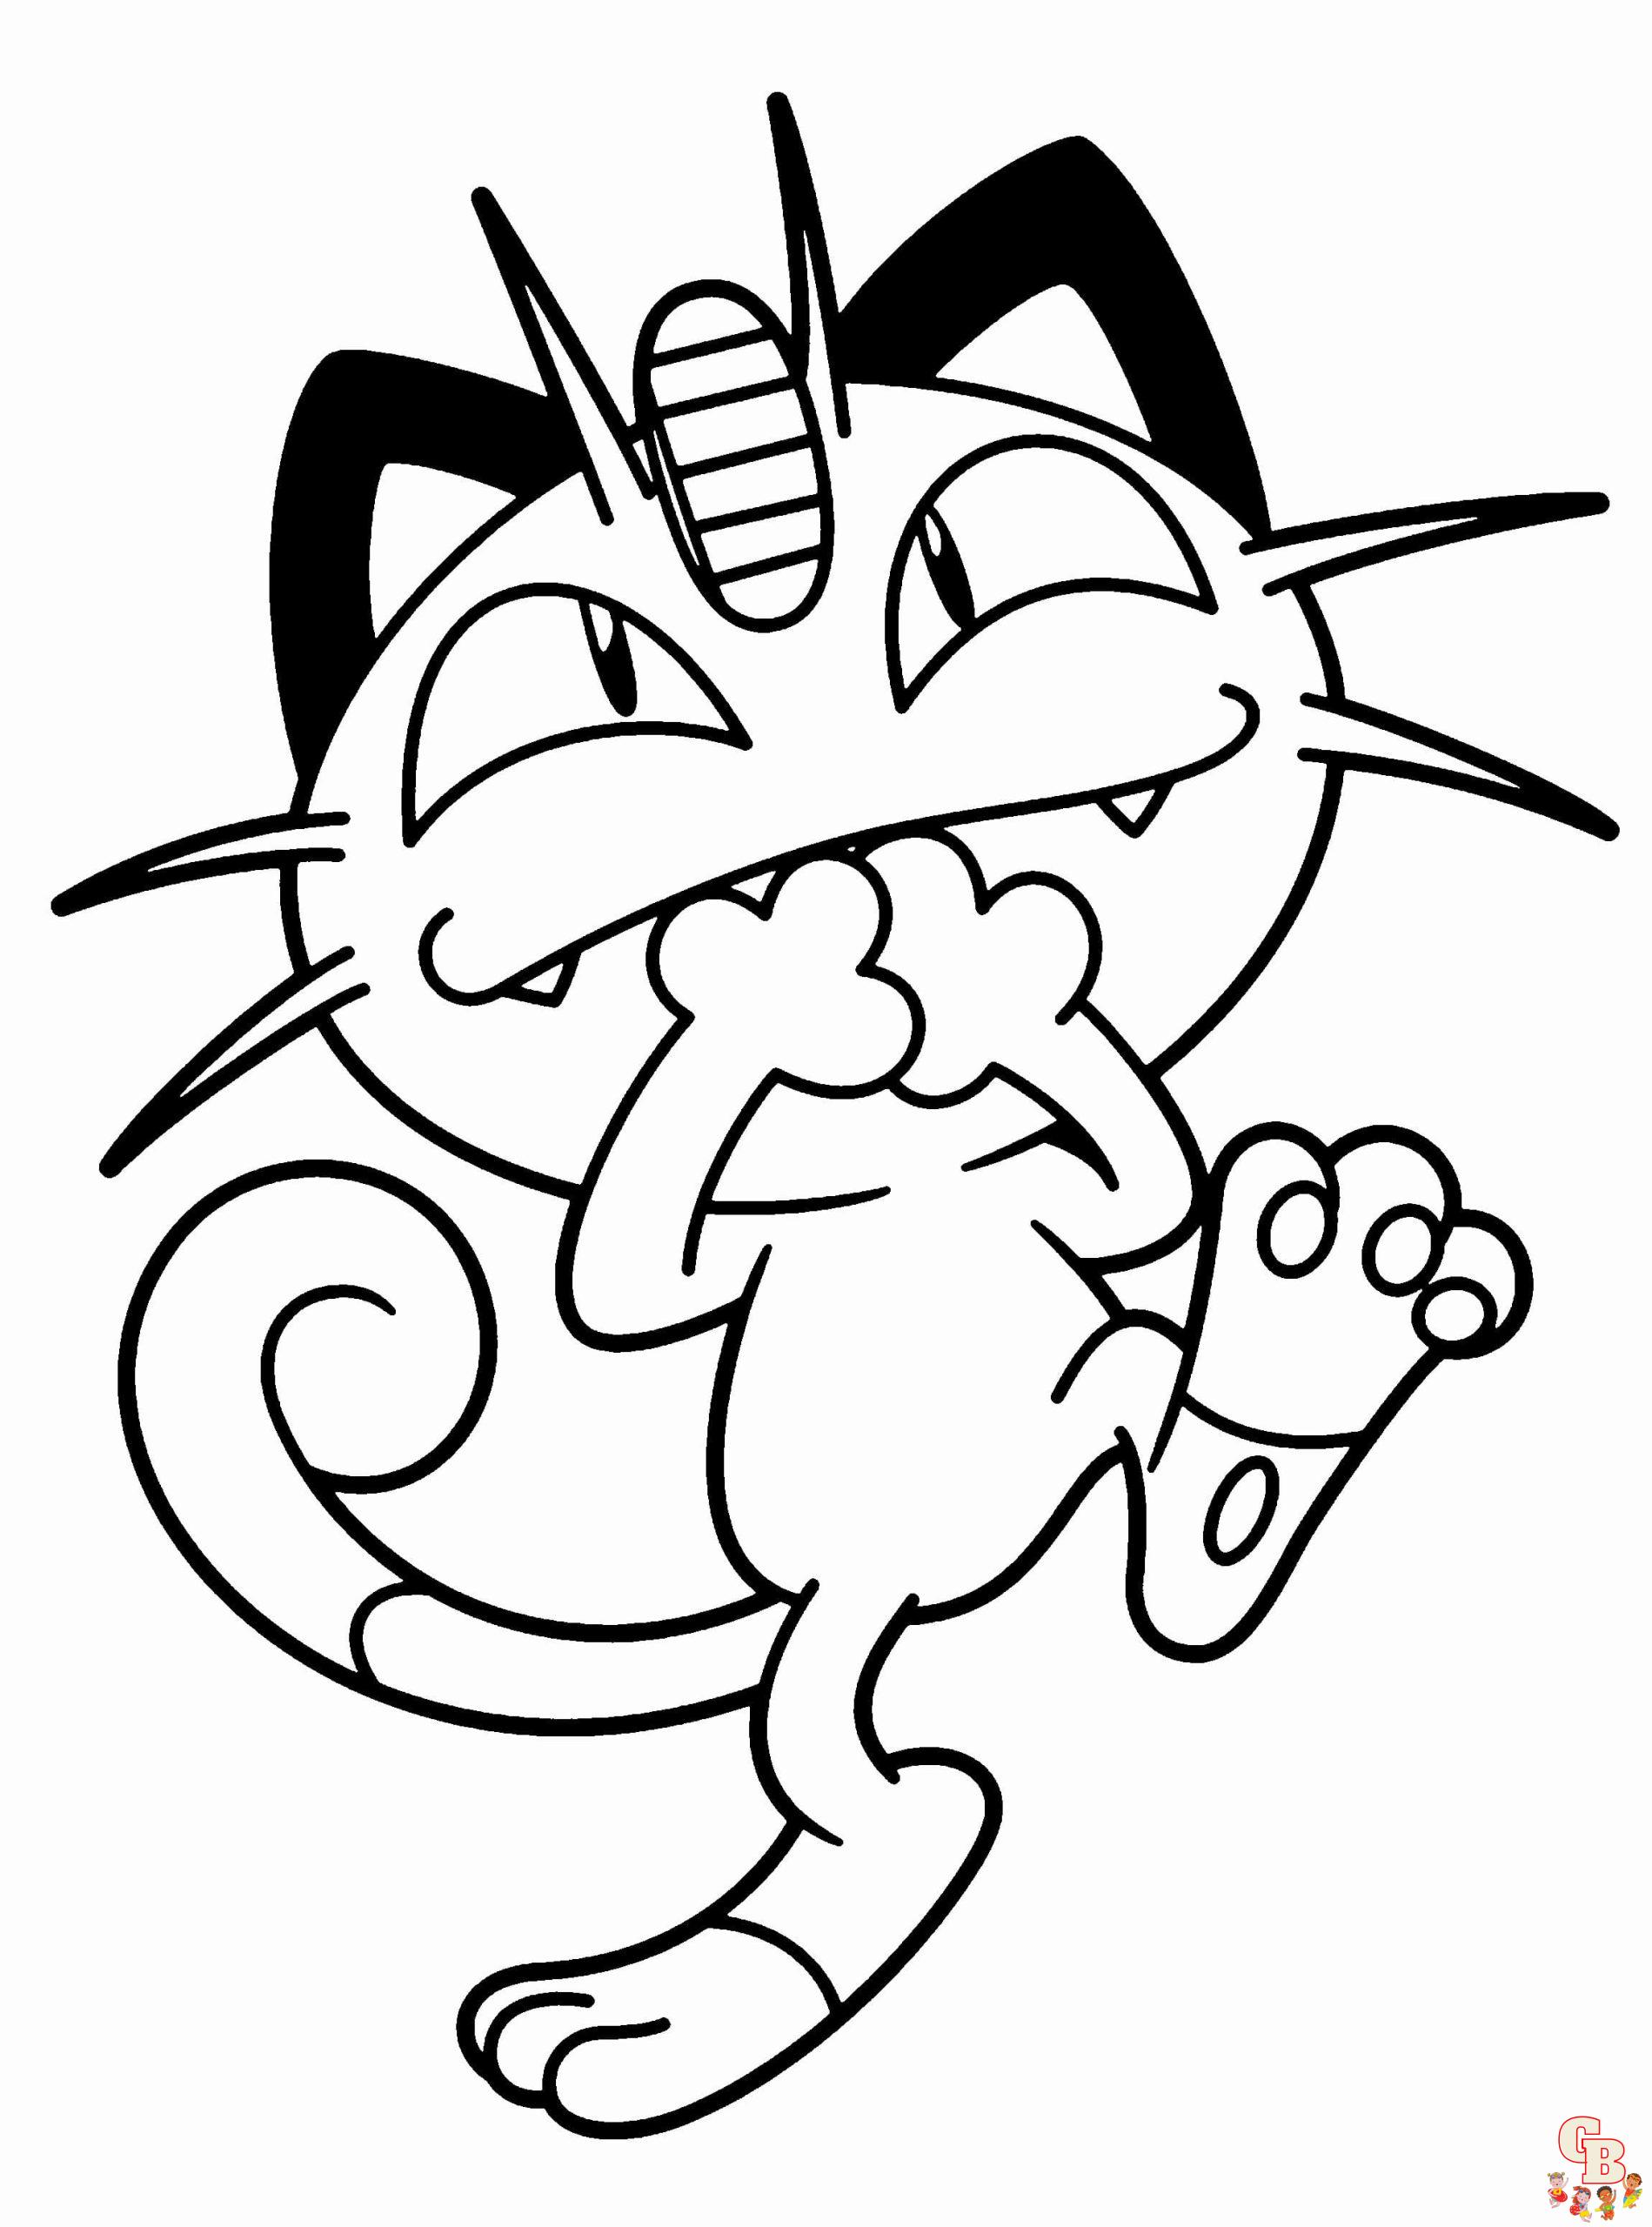 Meowth Coloring Pages